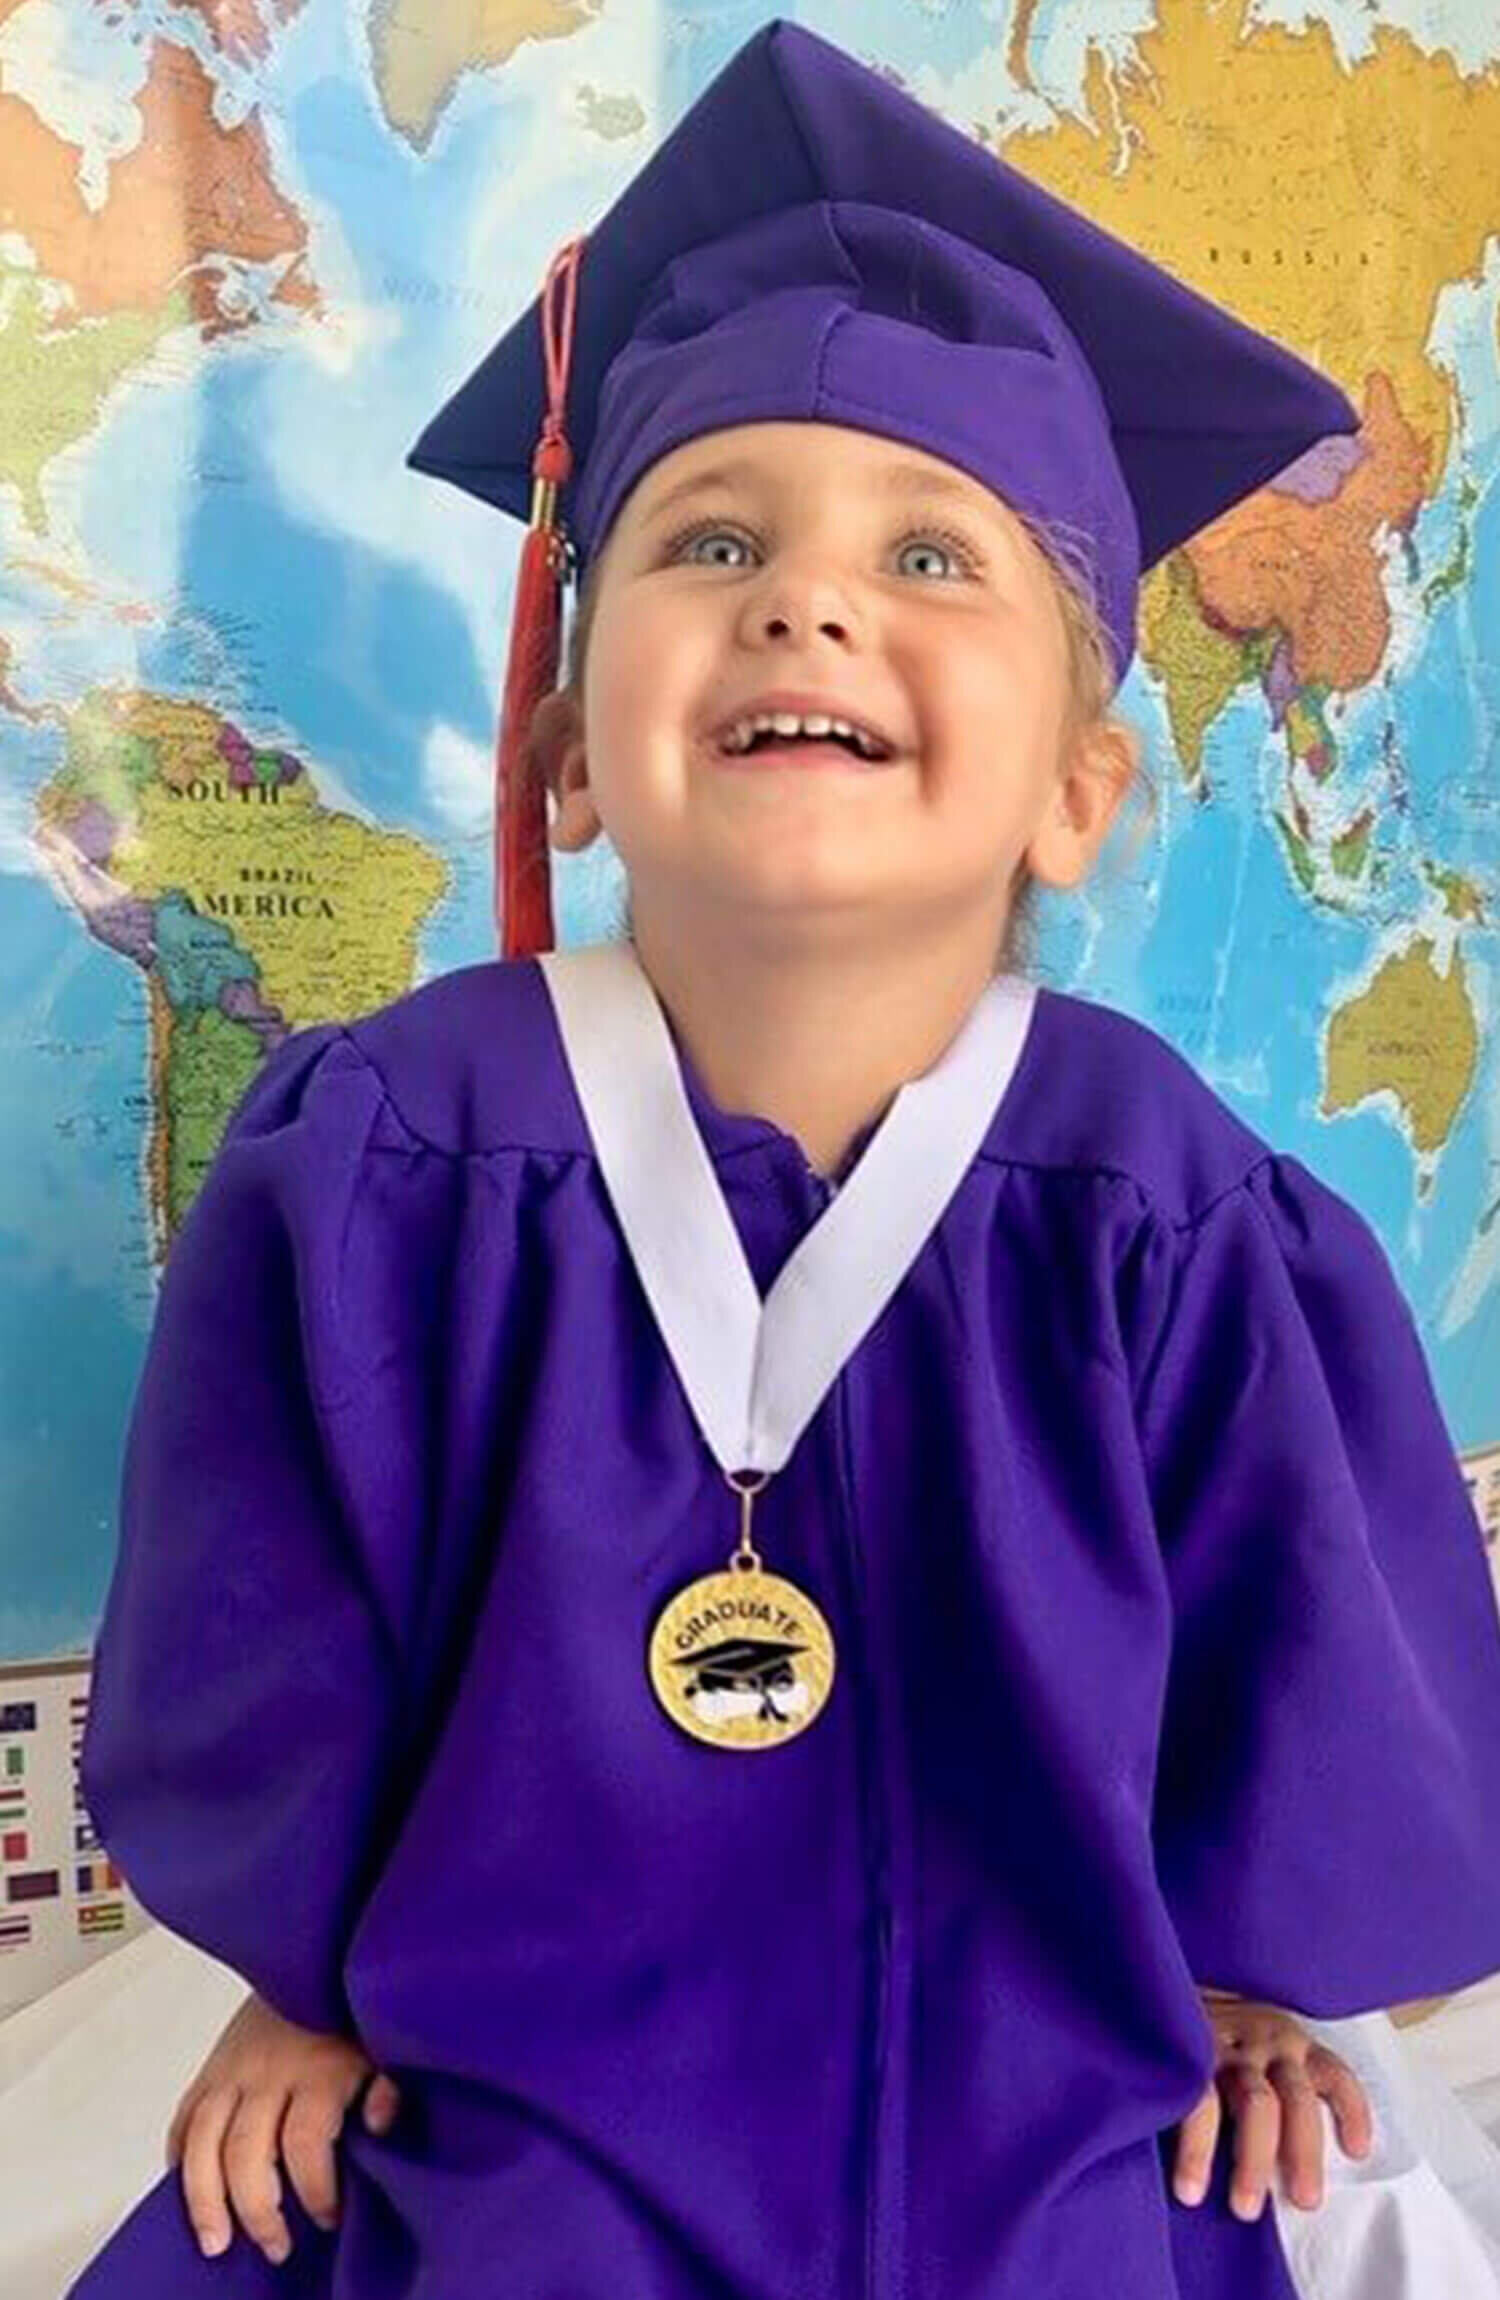 Kindy kids don black gown and caps for graduation | The Courier Mail